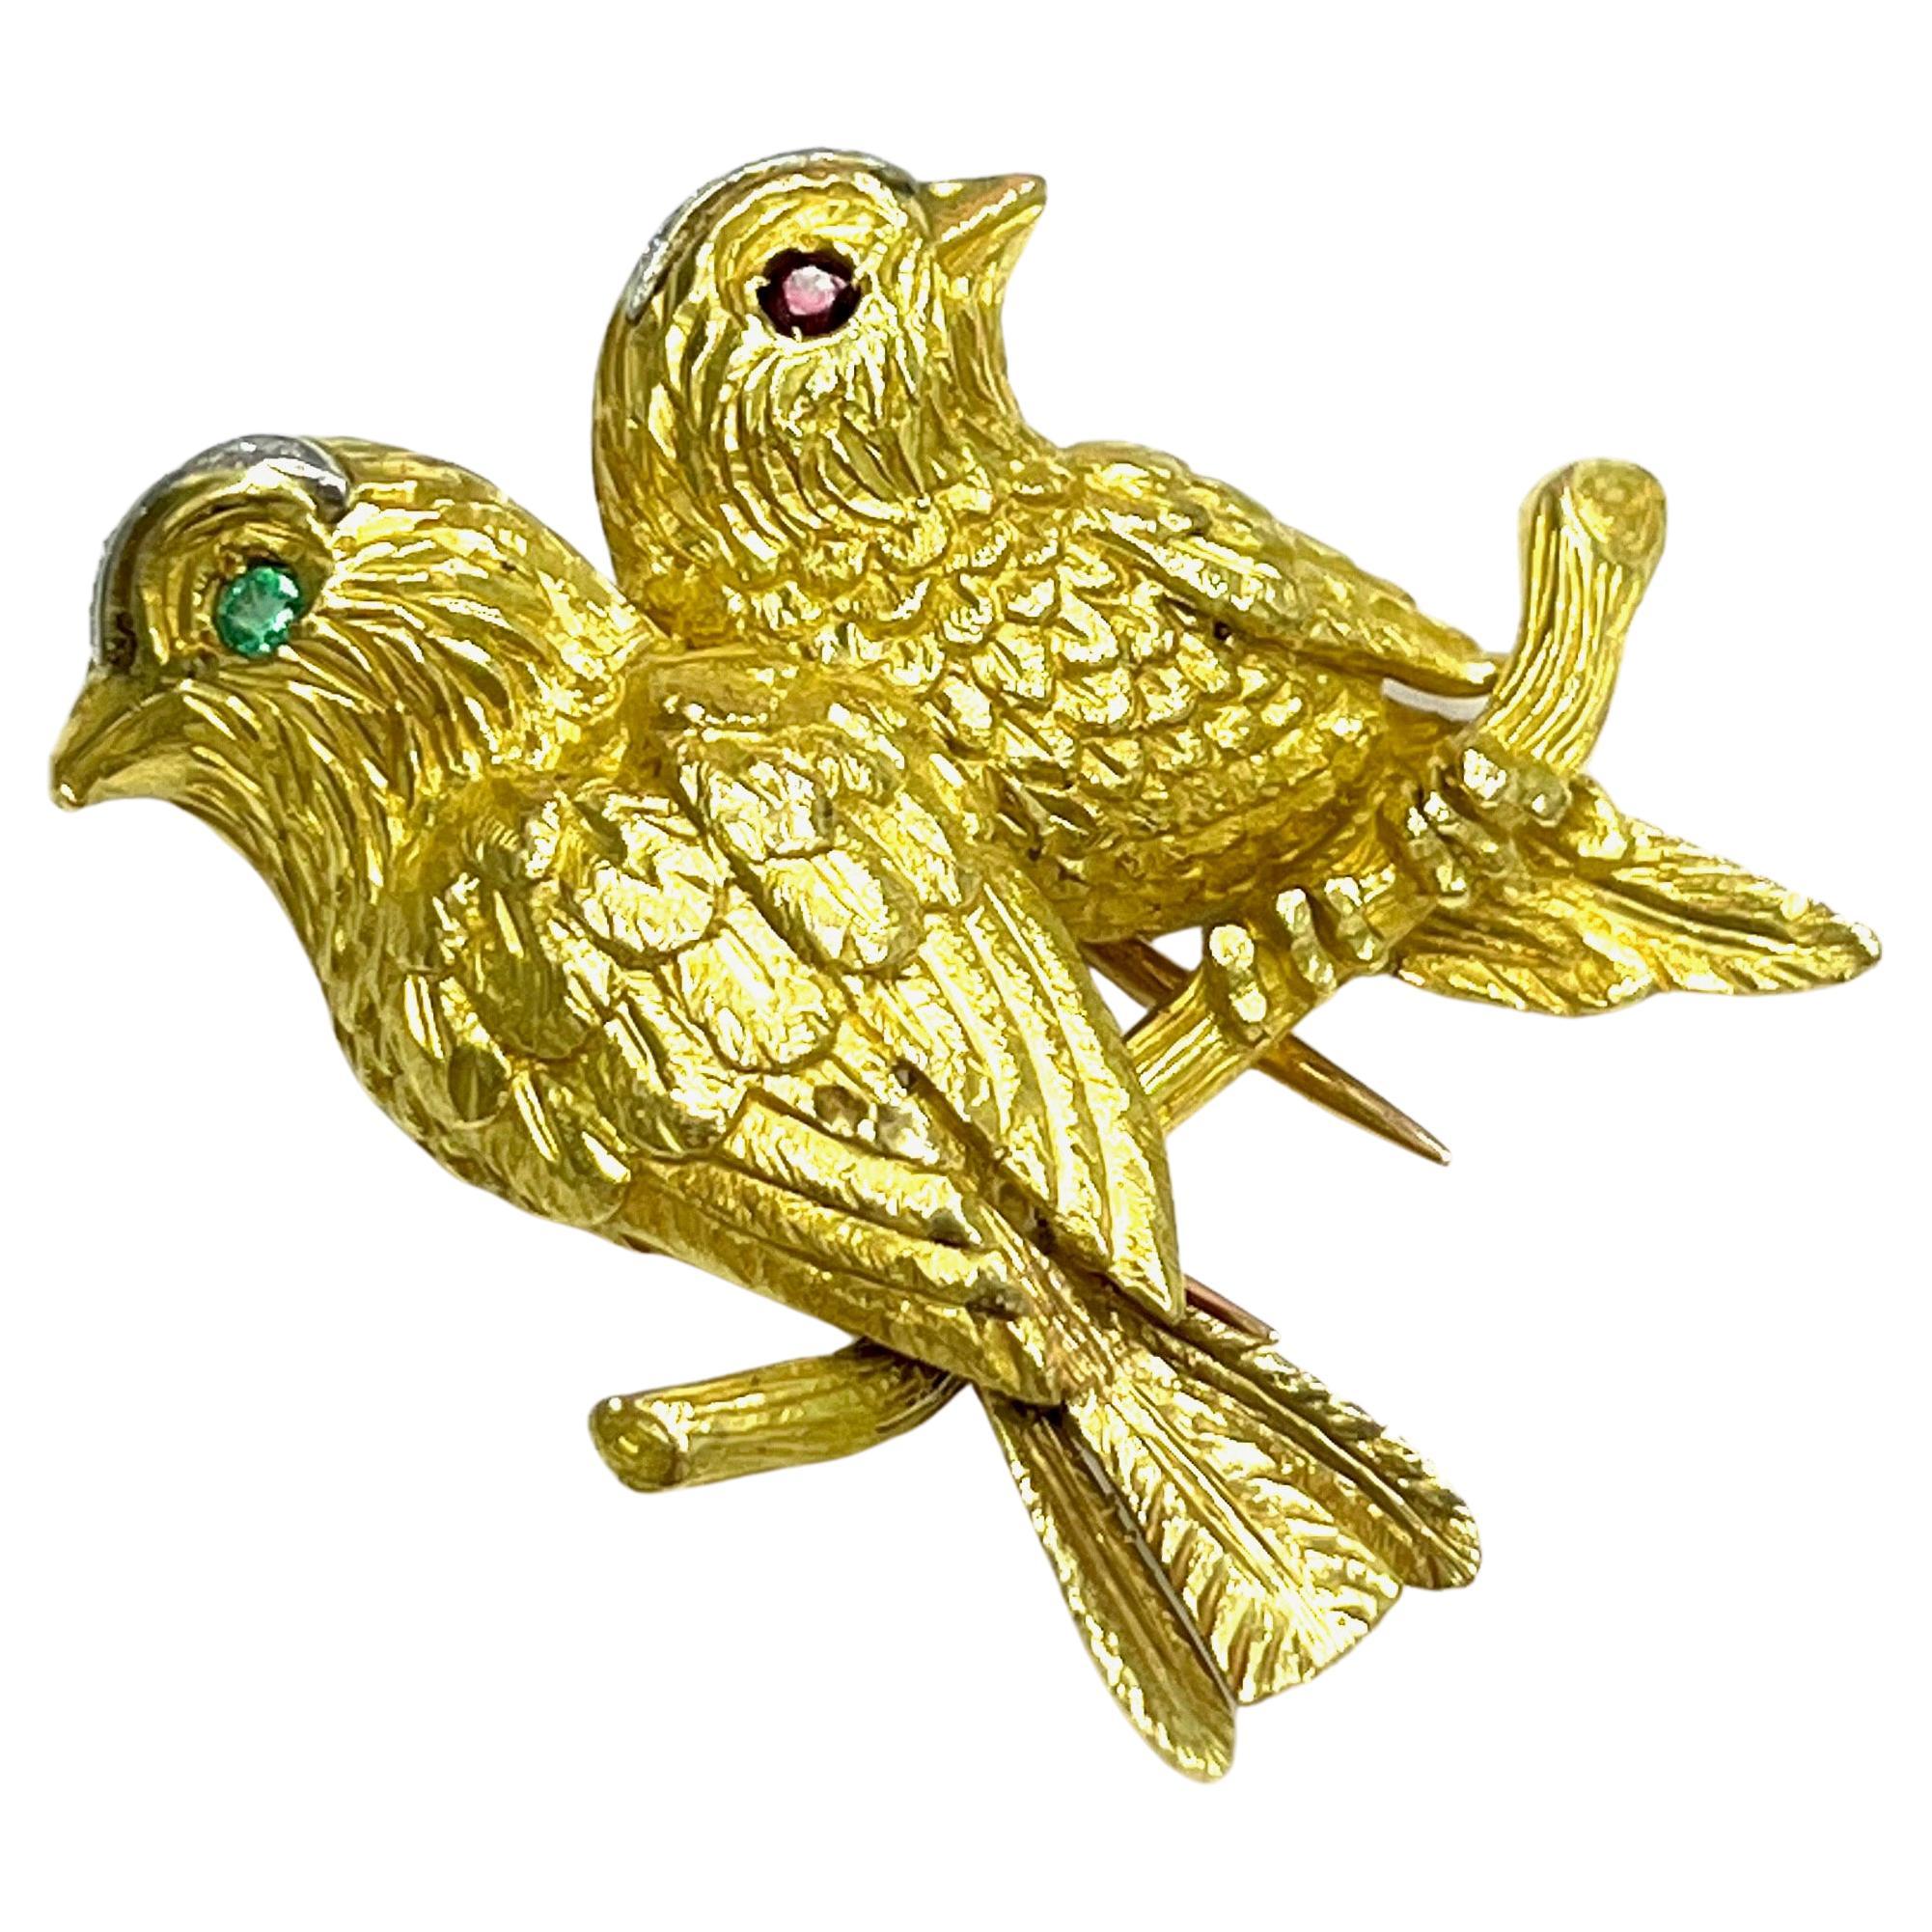 Cartier Paris Two Birds Yellow Gold Brooch, French

Two birds on a branch, round-cut emerald and round-cut ruby, set on 18 karat yellow gold; marked Paris

Size: width 3.5 cm; length 3.5 cm
Total weight: 16.0 grams